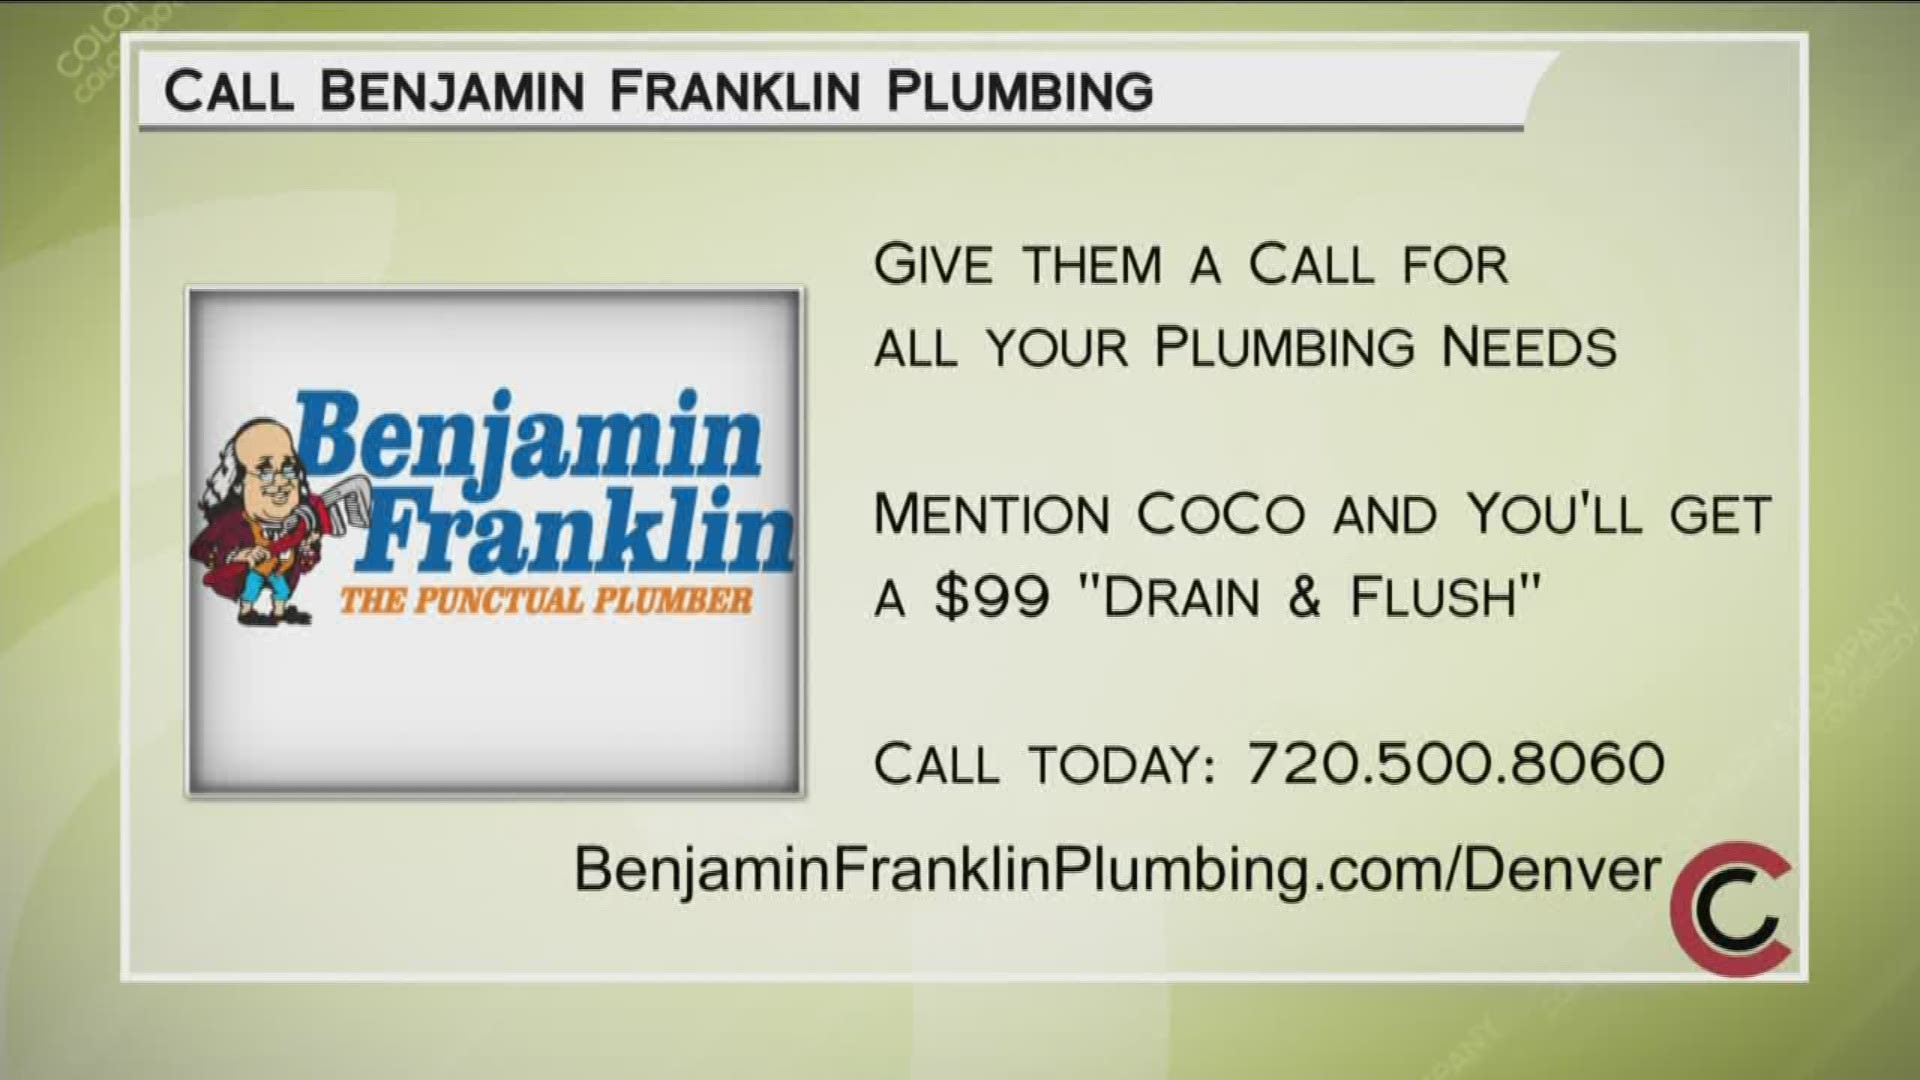 Call 720.500.8060 for all your plumbing needs. COCO viewers can get a Drain and Flush service for just $99. Visit BenjaminFranklinPlumbing.com/Denver for more info.